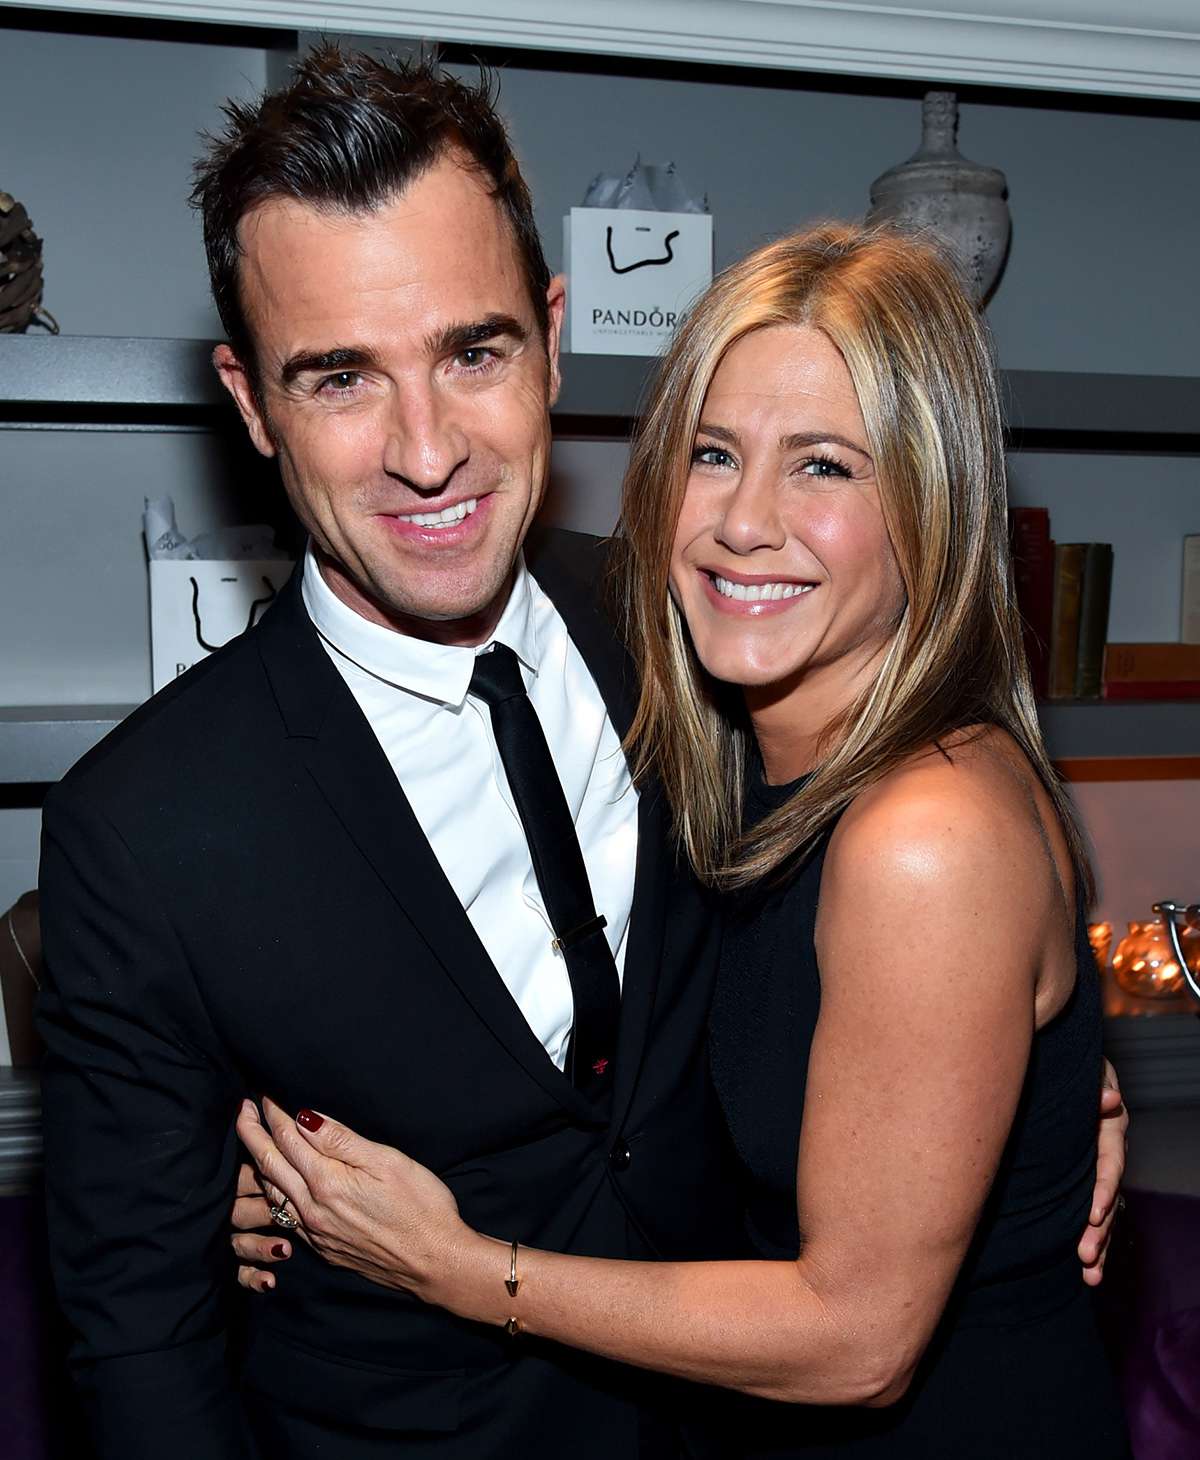 Justin Theroux (L) and actress/executive producer Jennifer Aniston attend the "Cake" cocktail reception presented by PANDORA Jewelry at West Bar on September 8, 2014